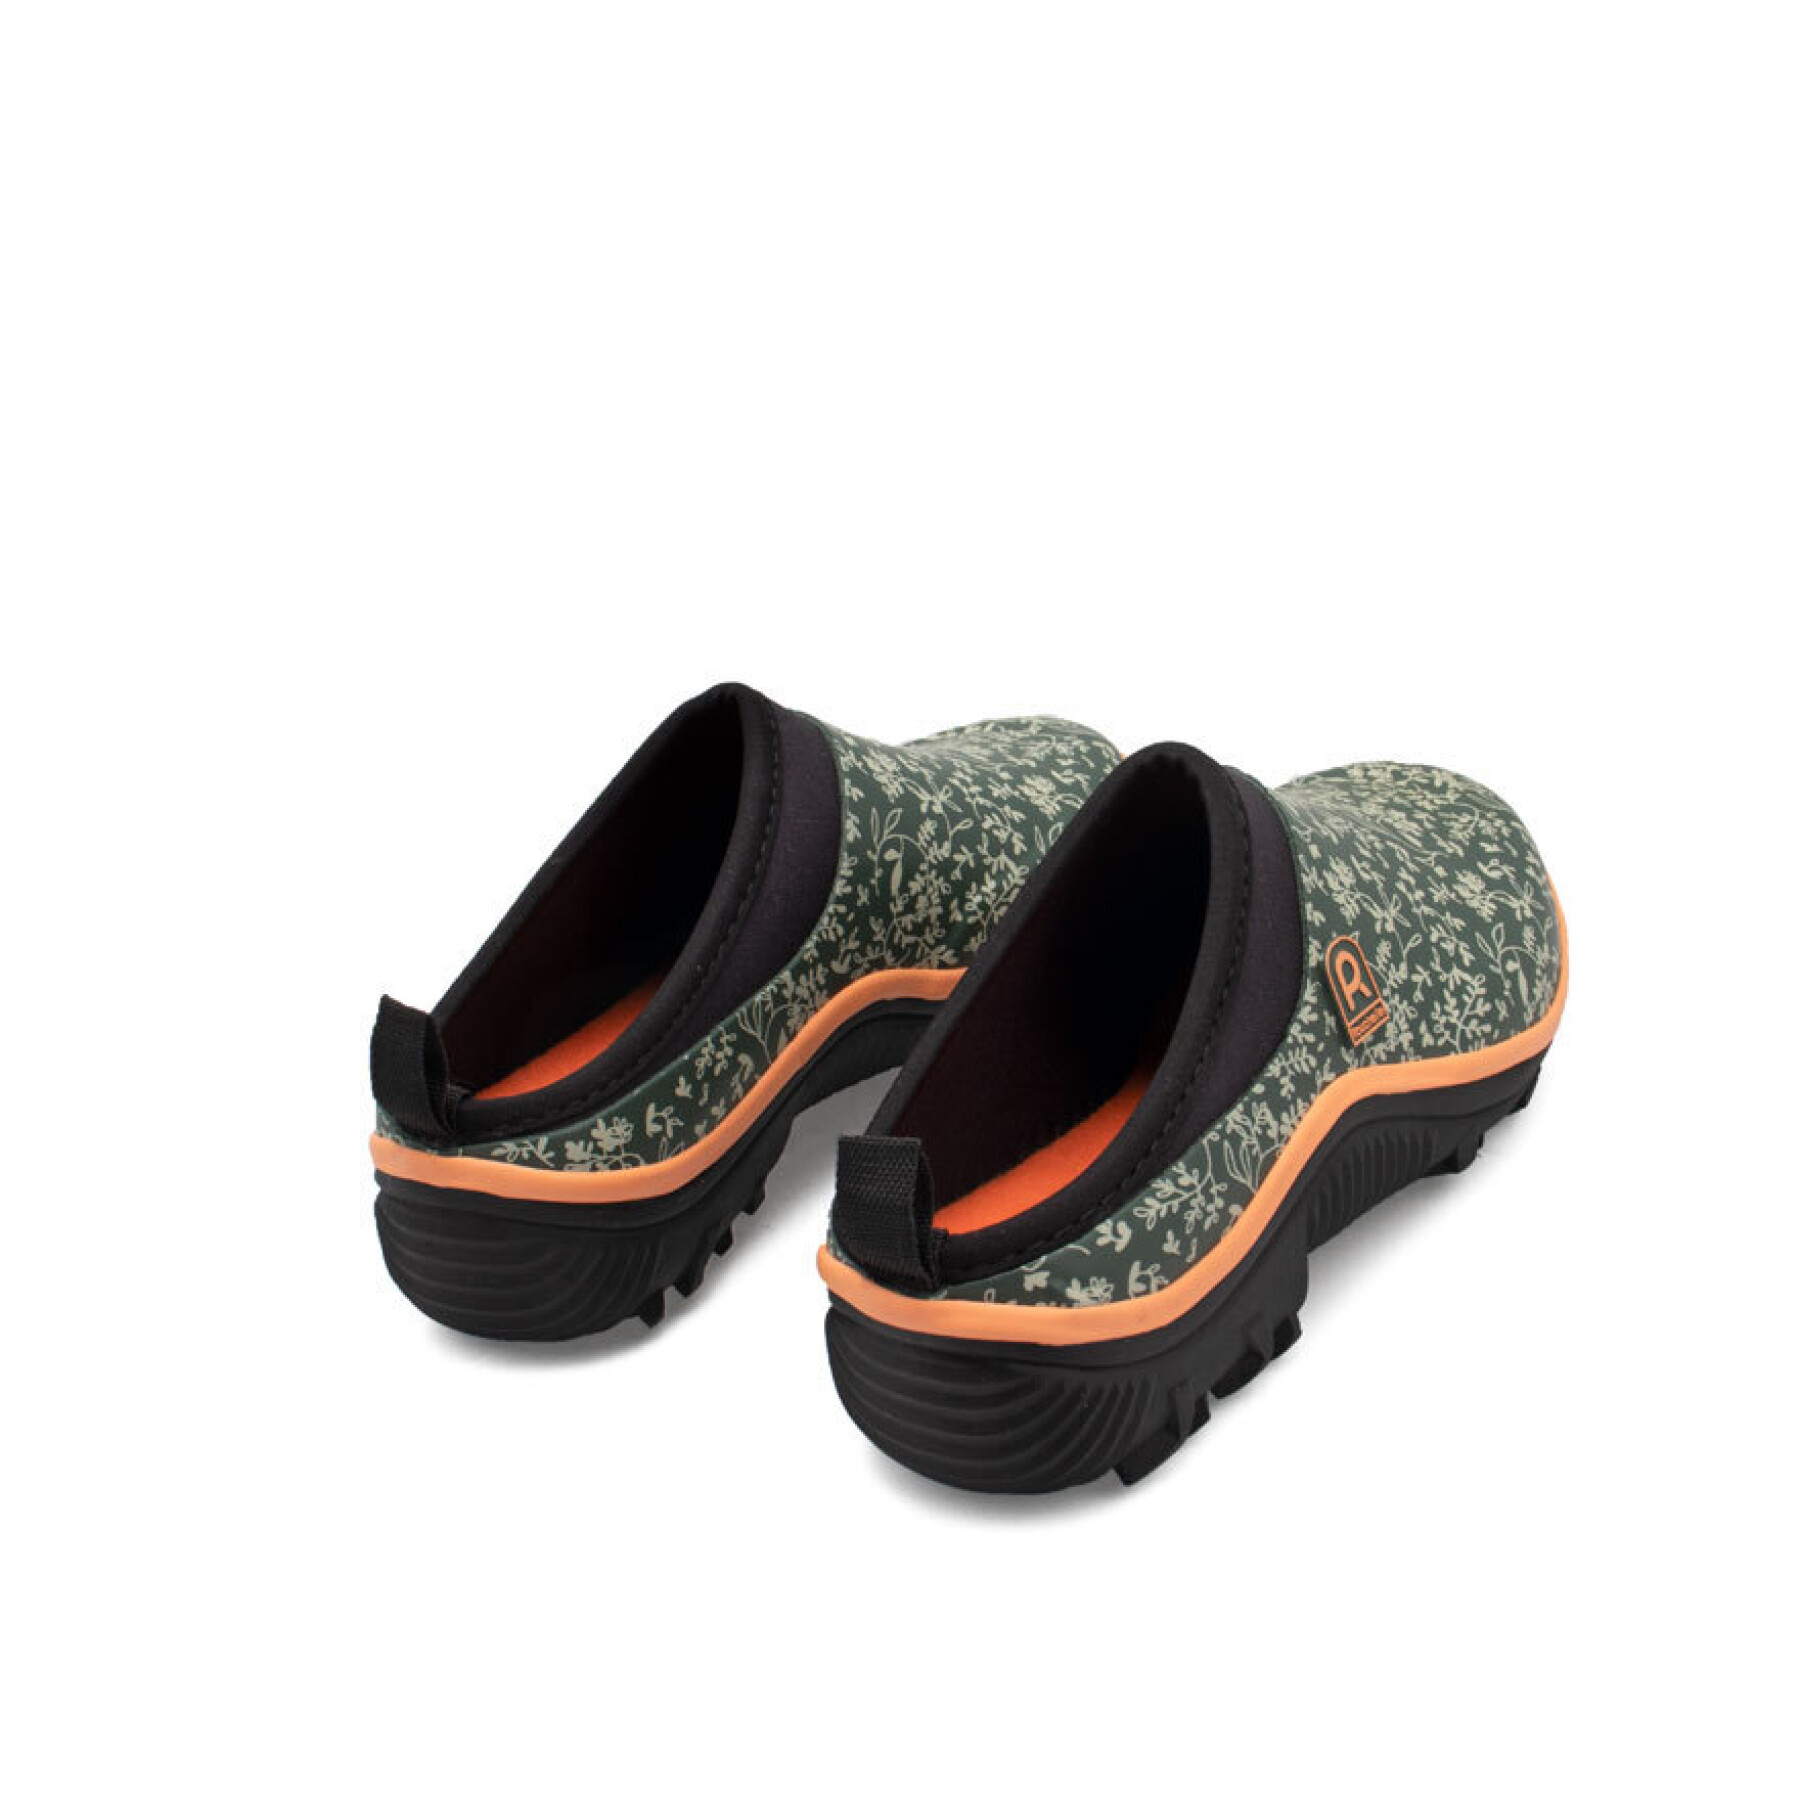 Women's clogs Rouchette Trial Open Protect The Planet